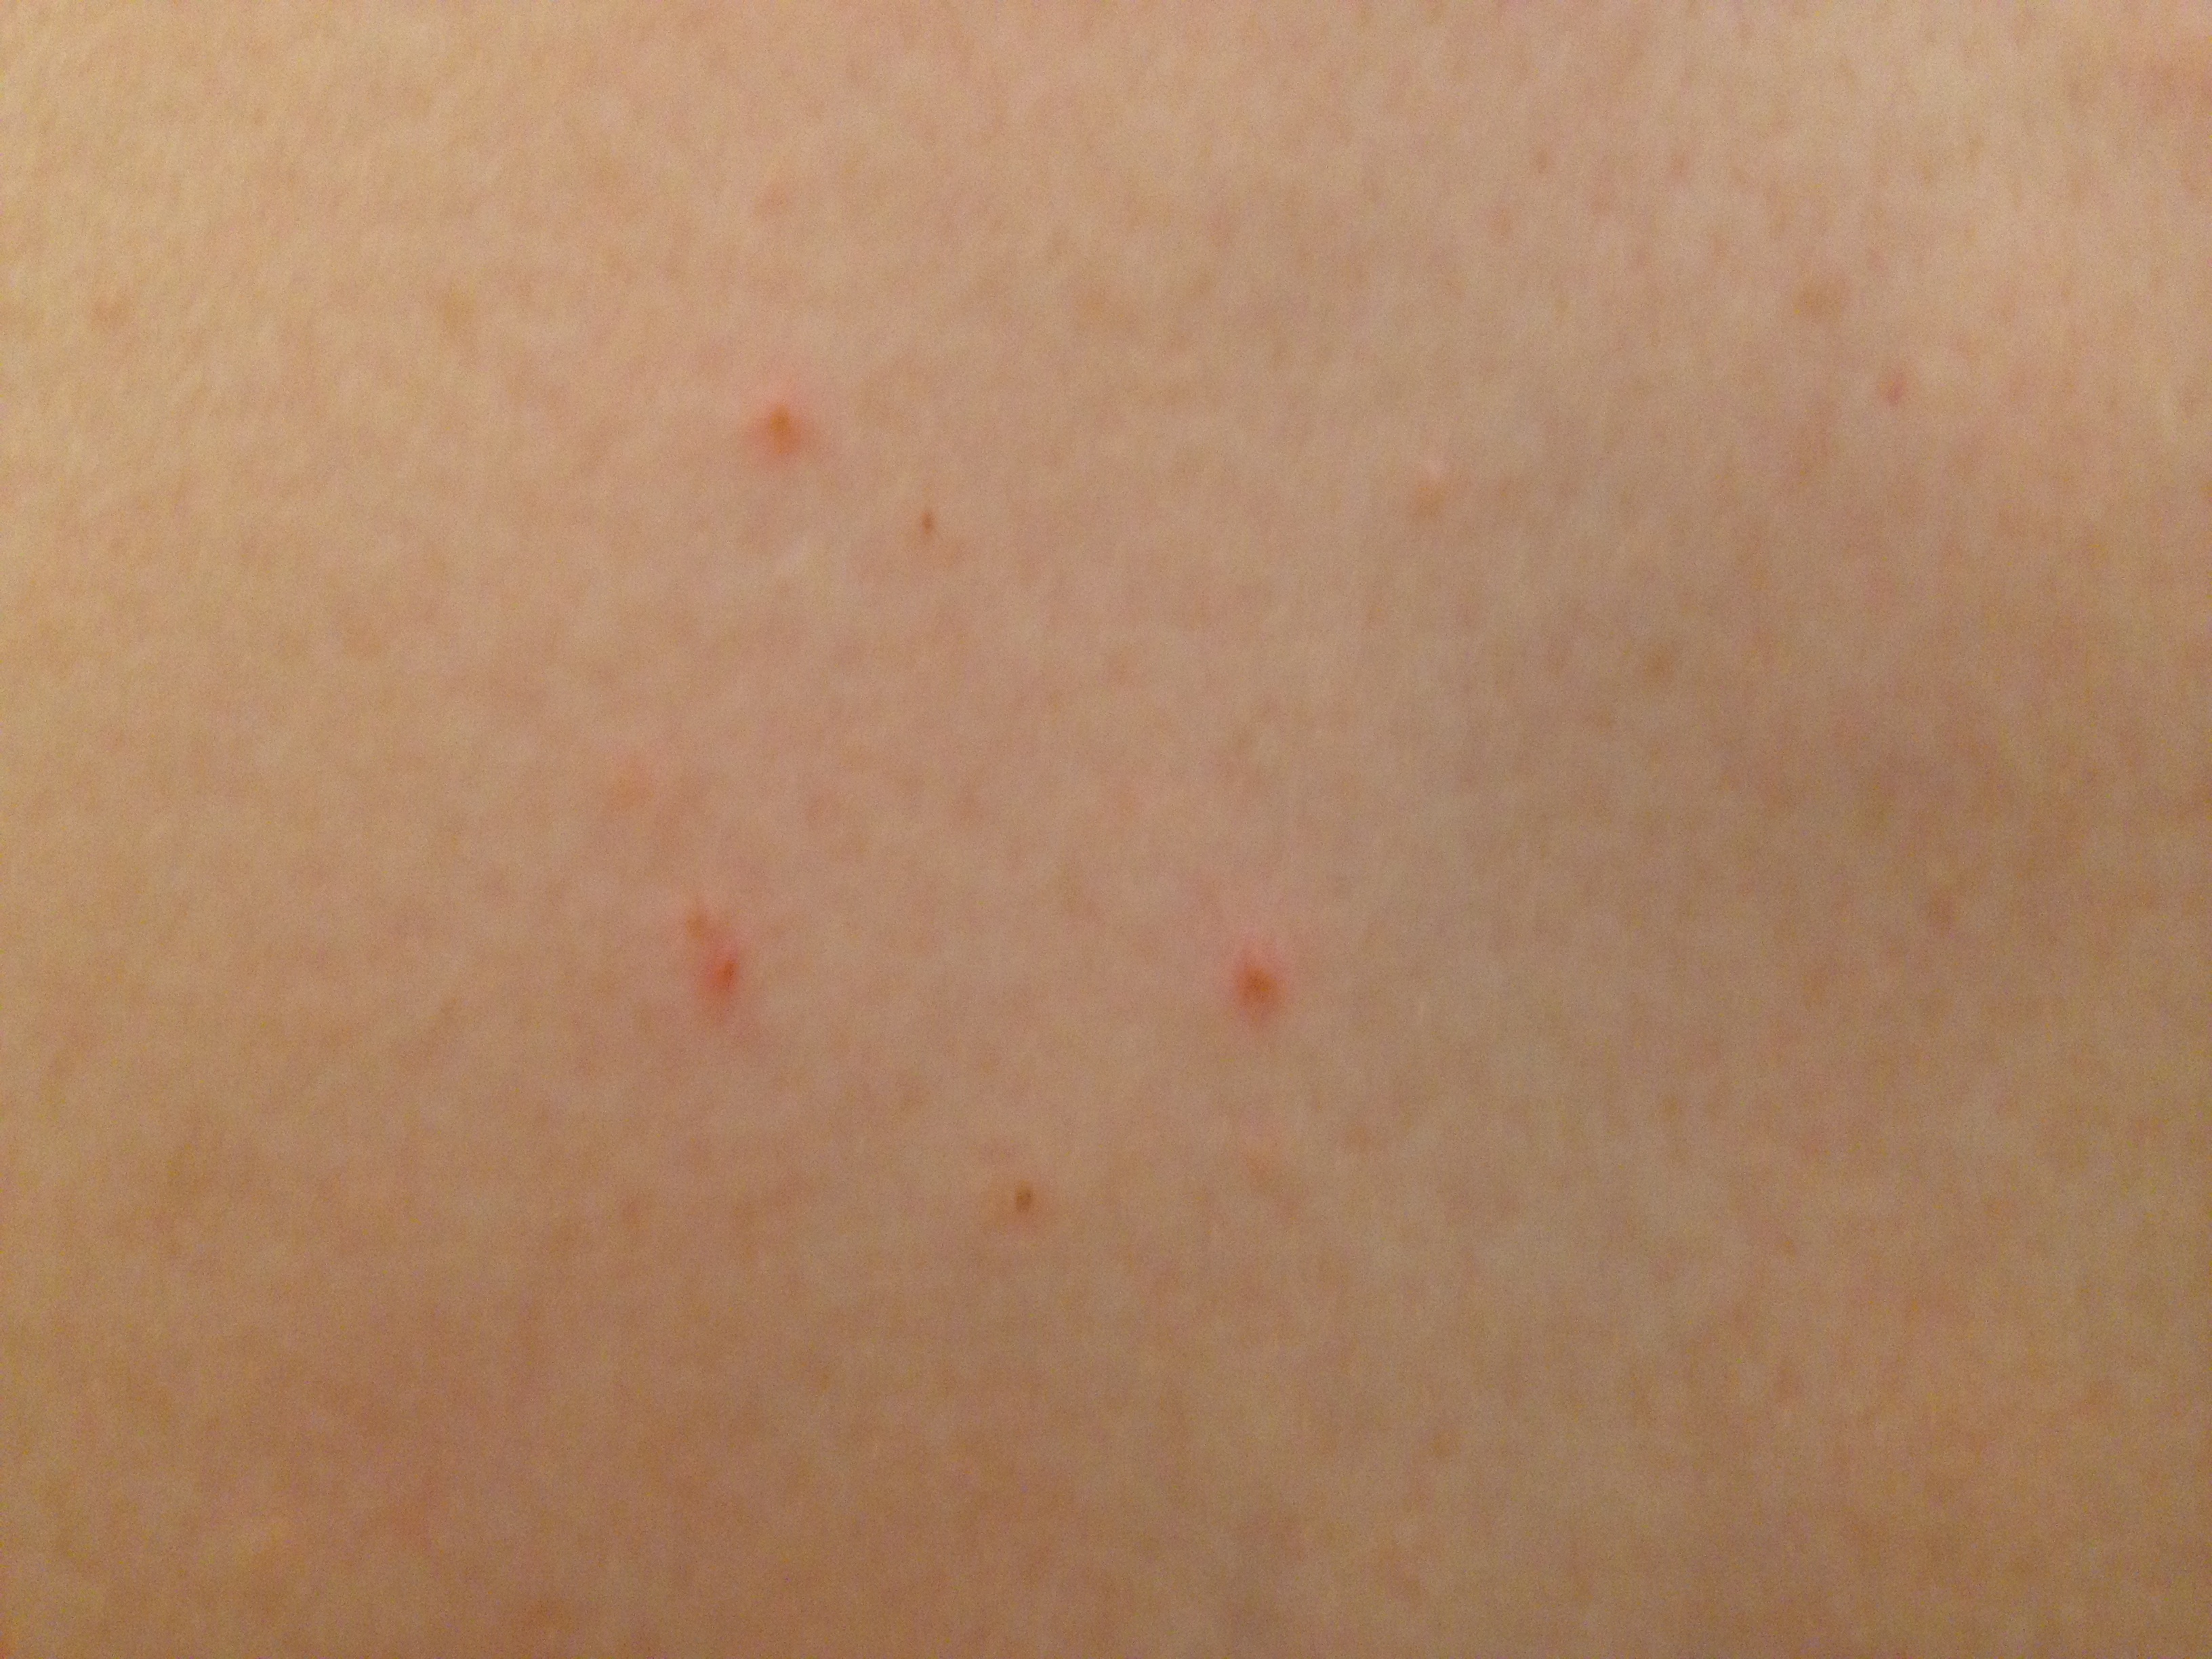 itchy bumps on body - pictures, photos